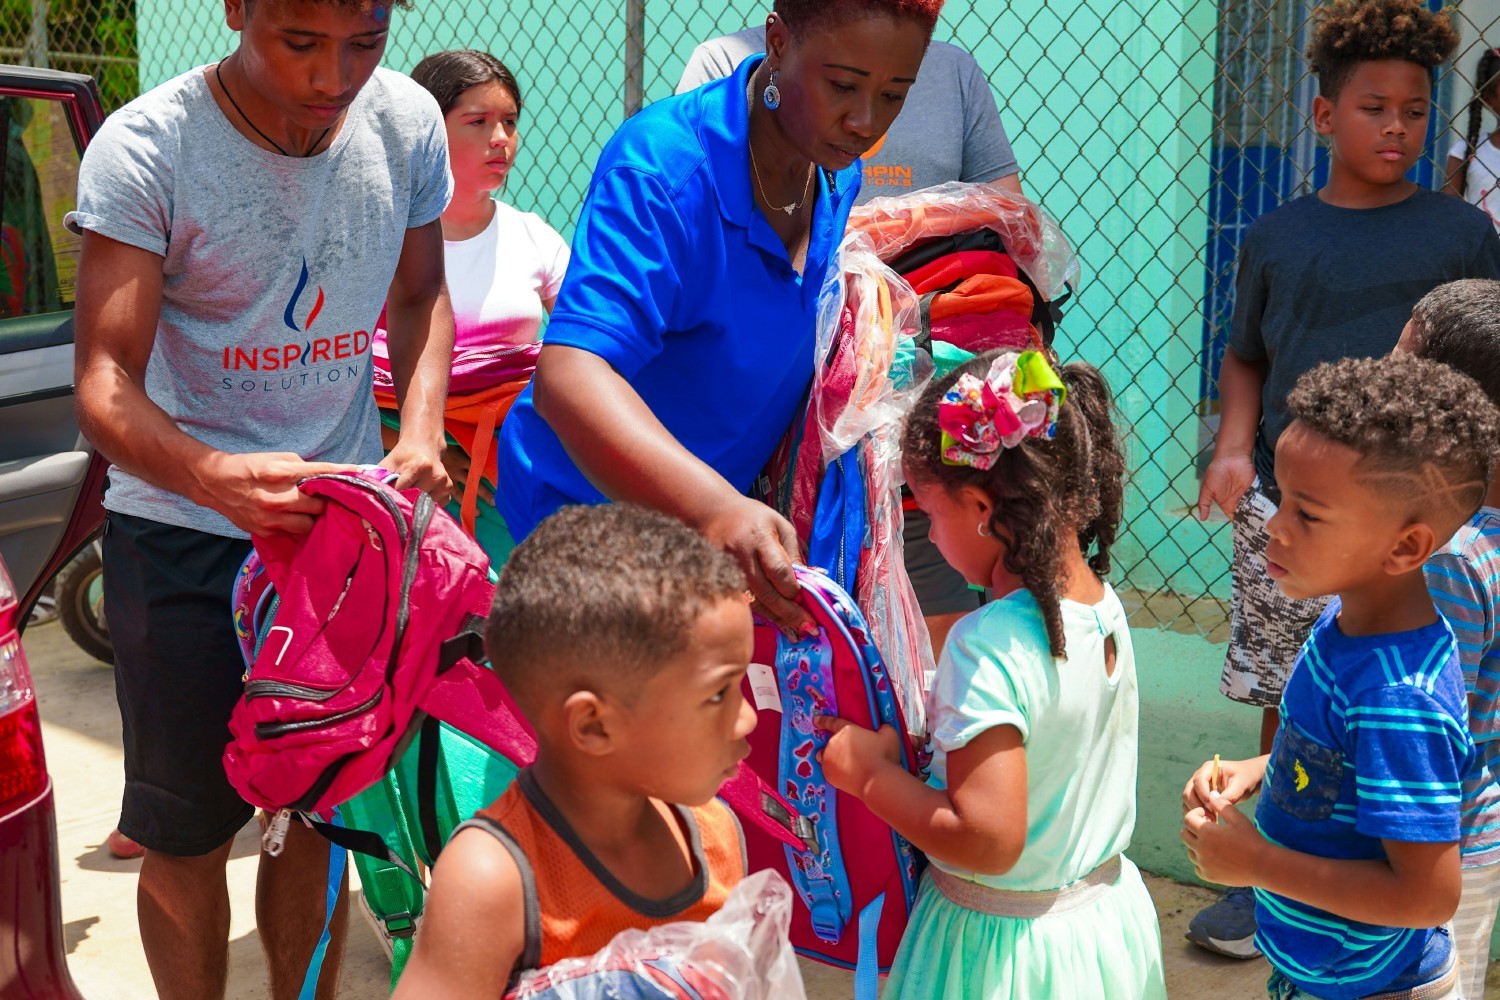 The Inspired Team providing backpacks and school supplies in the Dominican Republic.